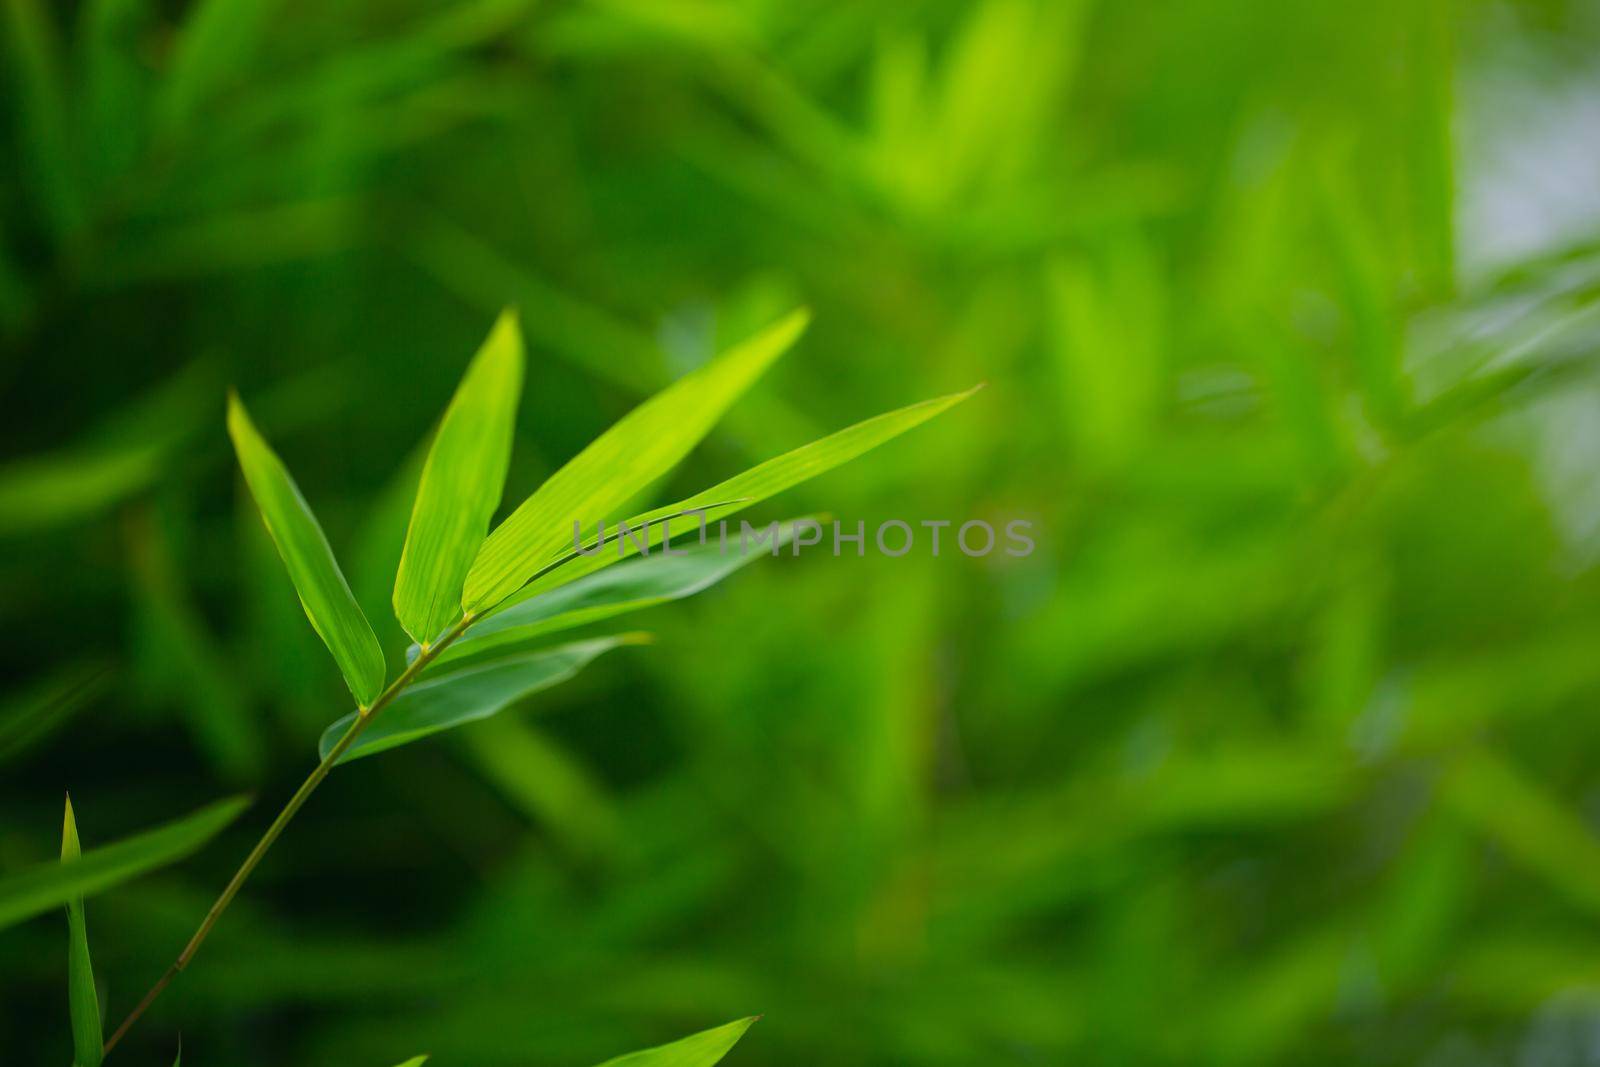 Green leaves bamboo refresh background